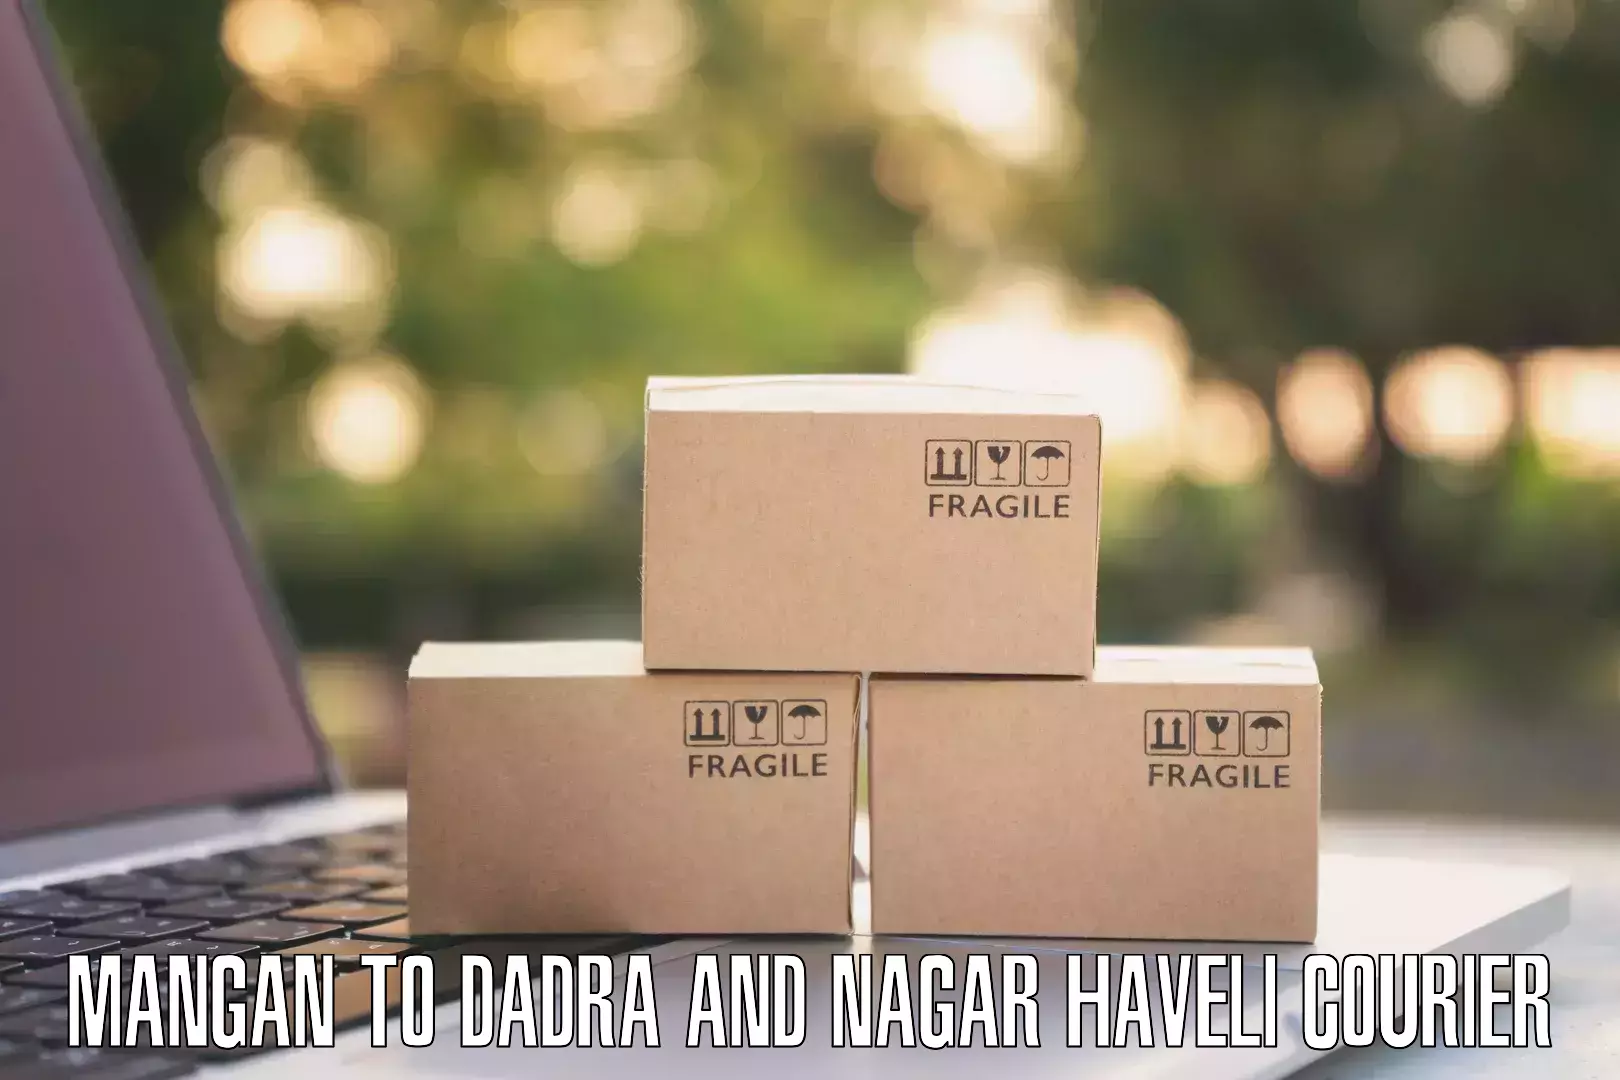 Easy access courier services Mangan to Dadra and Nagar Haveli